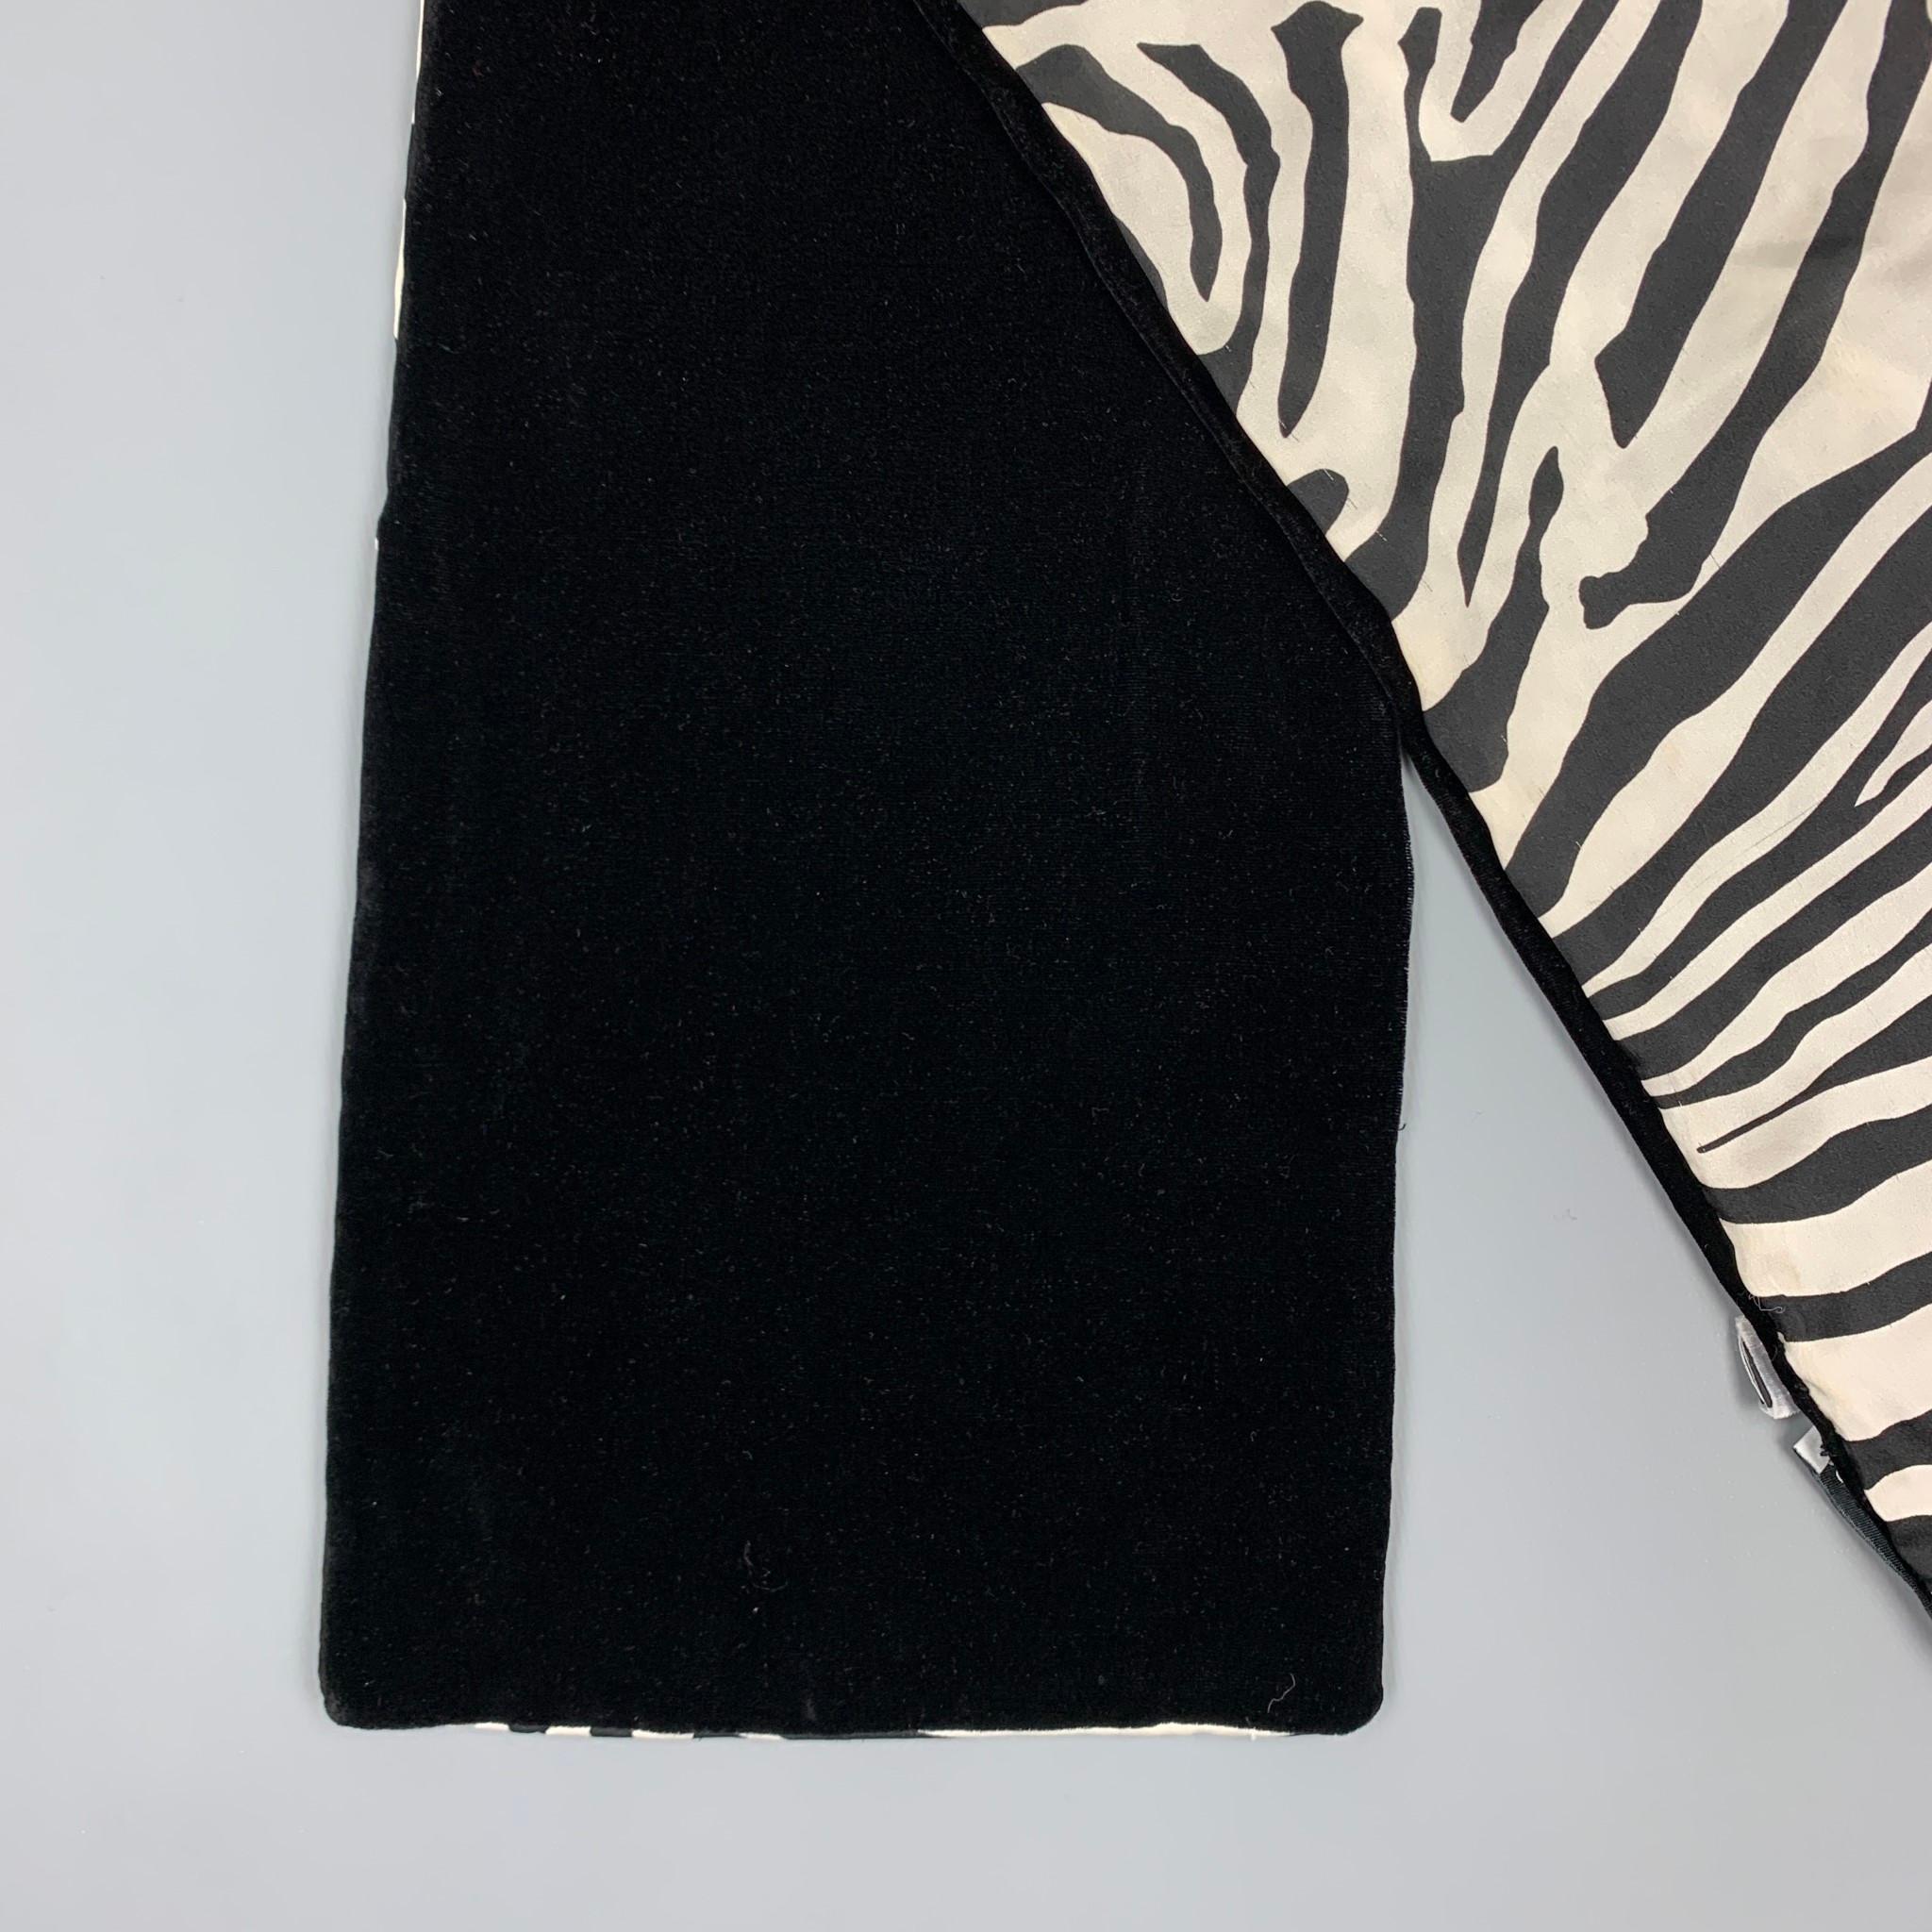 DOLCE & GABBANA scarf comes in a black & white zebra print rayon & silk velvet featuring a reversible style. Moderate wear. Made in Italy.

Good Pre-Owned Condition.

Measurements:

8 in. x 38 in.
